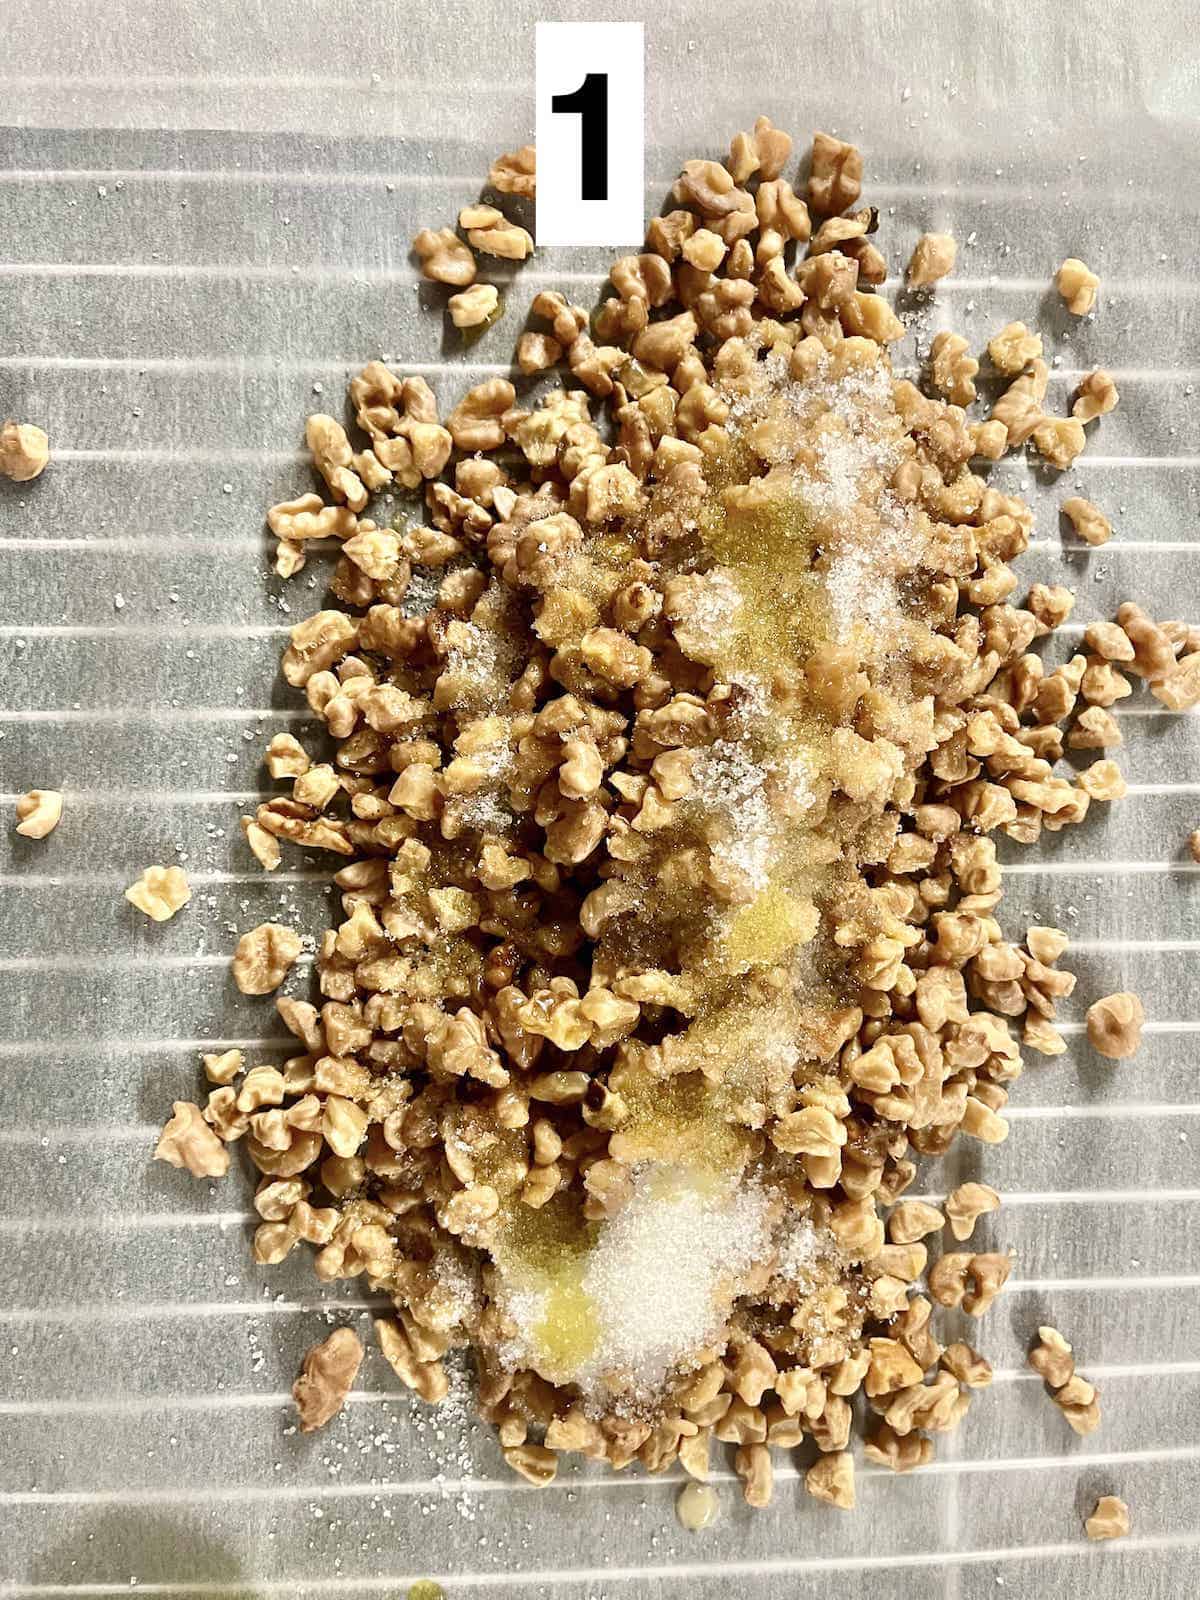 Walnuts, sugar, and oil on parchment paper.